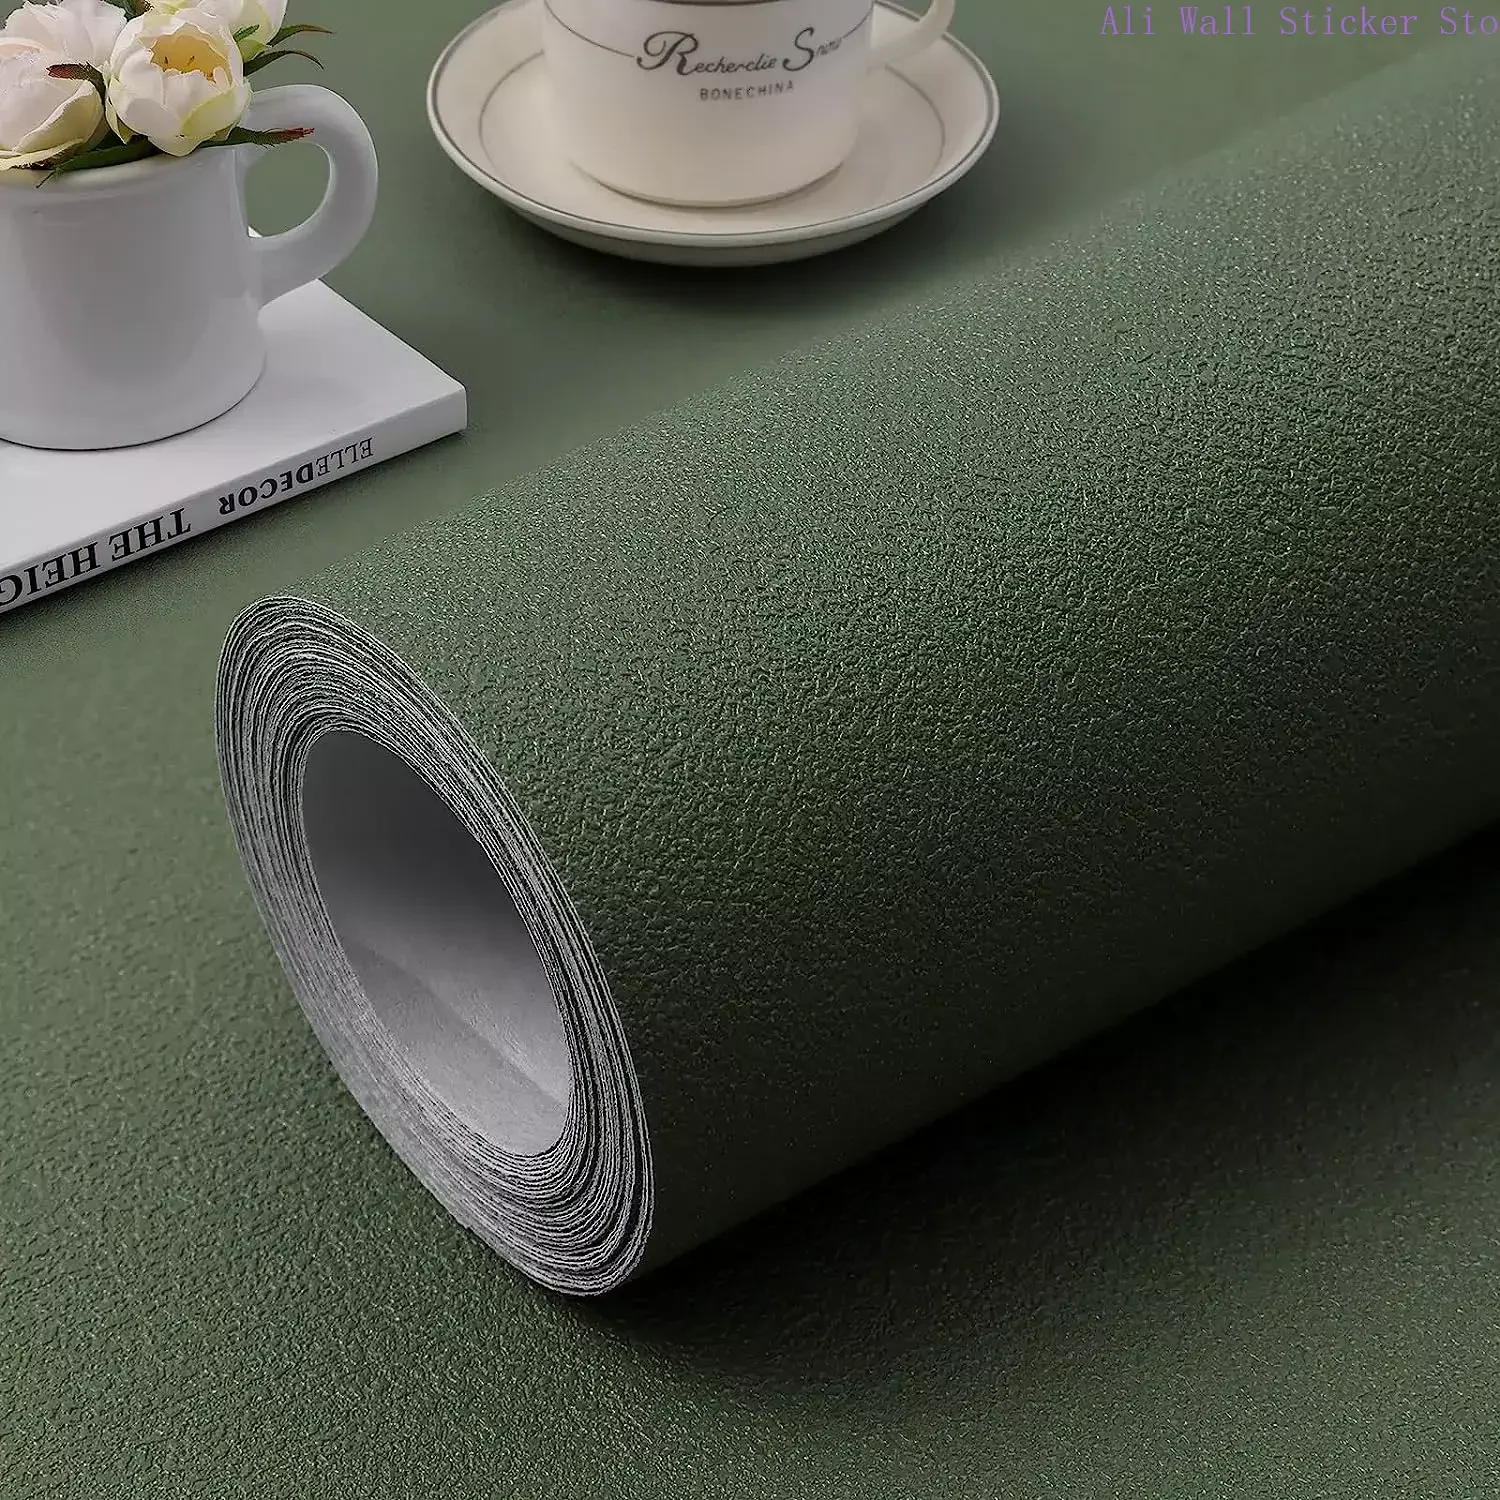 Green Wallpaper Self Adhesive and Removable Vinyl 3D Film Stick Paper To Apply Wall Home Decorative Liner Table and Door Reform luckyyj peel and stick wallpaper gold stripes wallpaper luxury paper removable self adhesive vinyl film decor shelf drawer liner